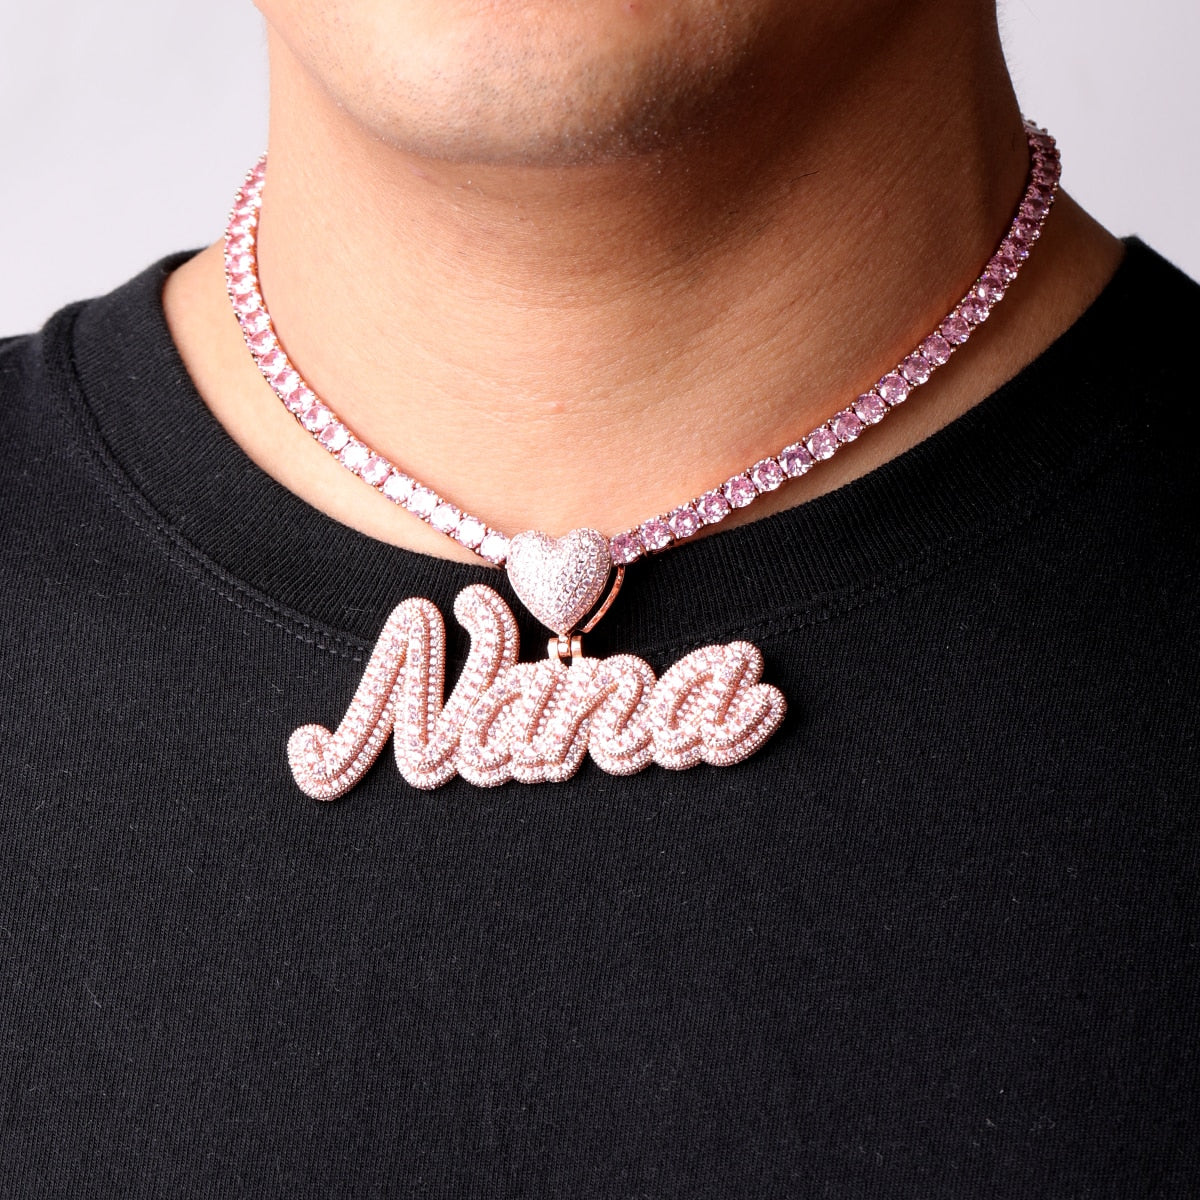 Custom Name Necklace | Name Plate Necklace | Personalized Nameplate Necklace